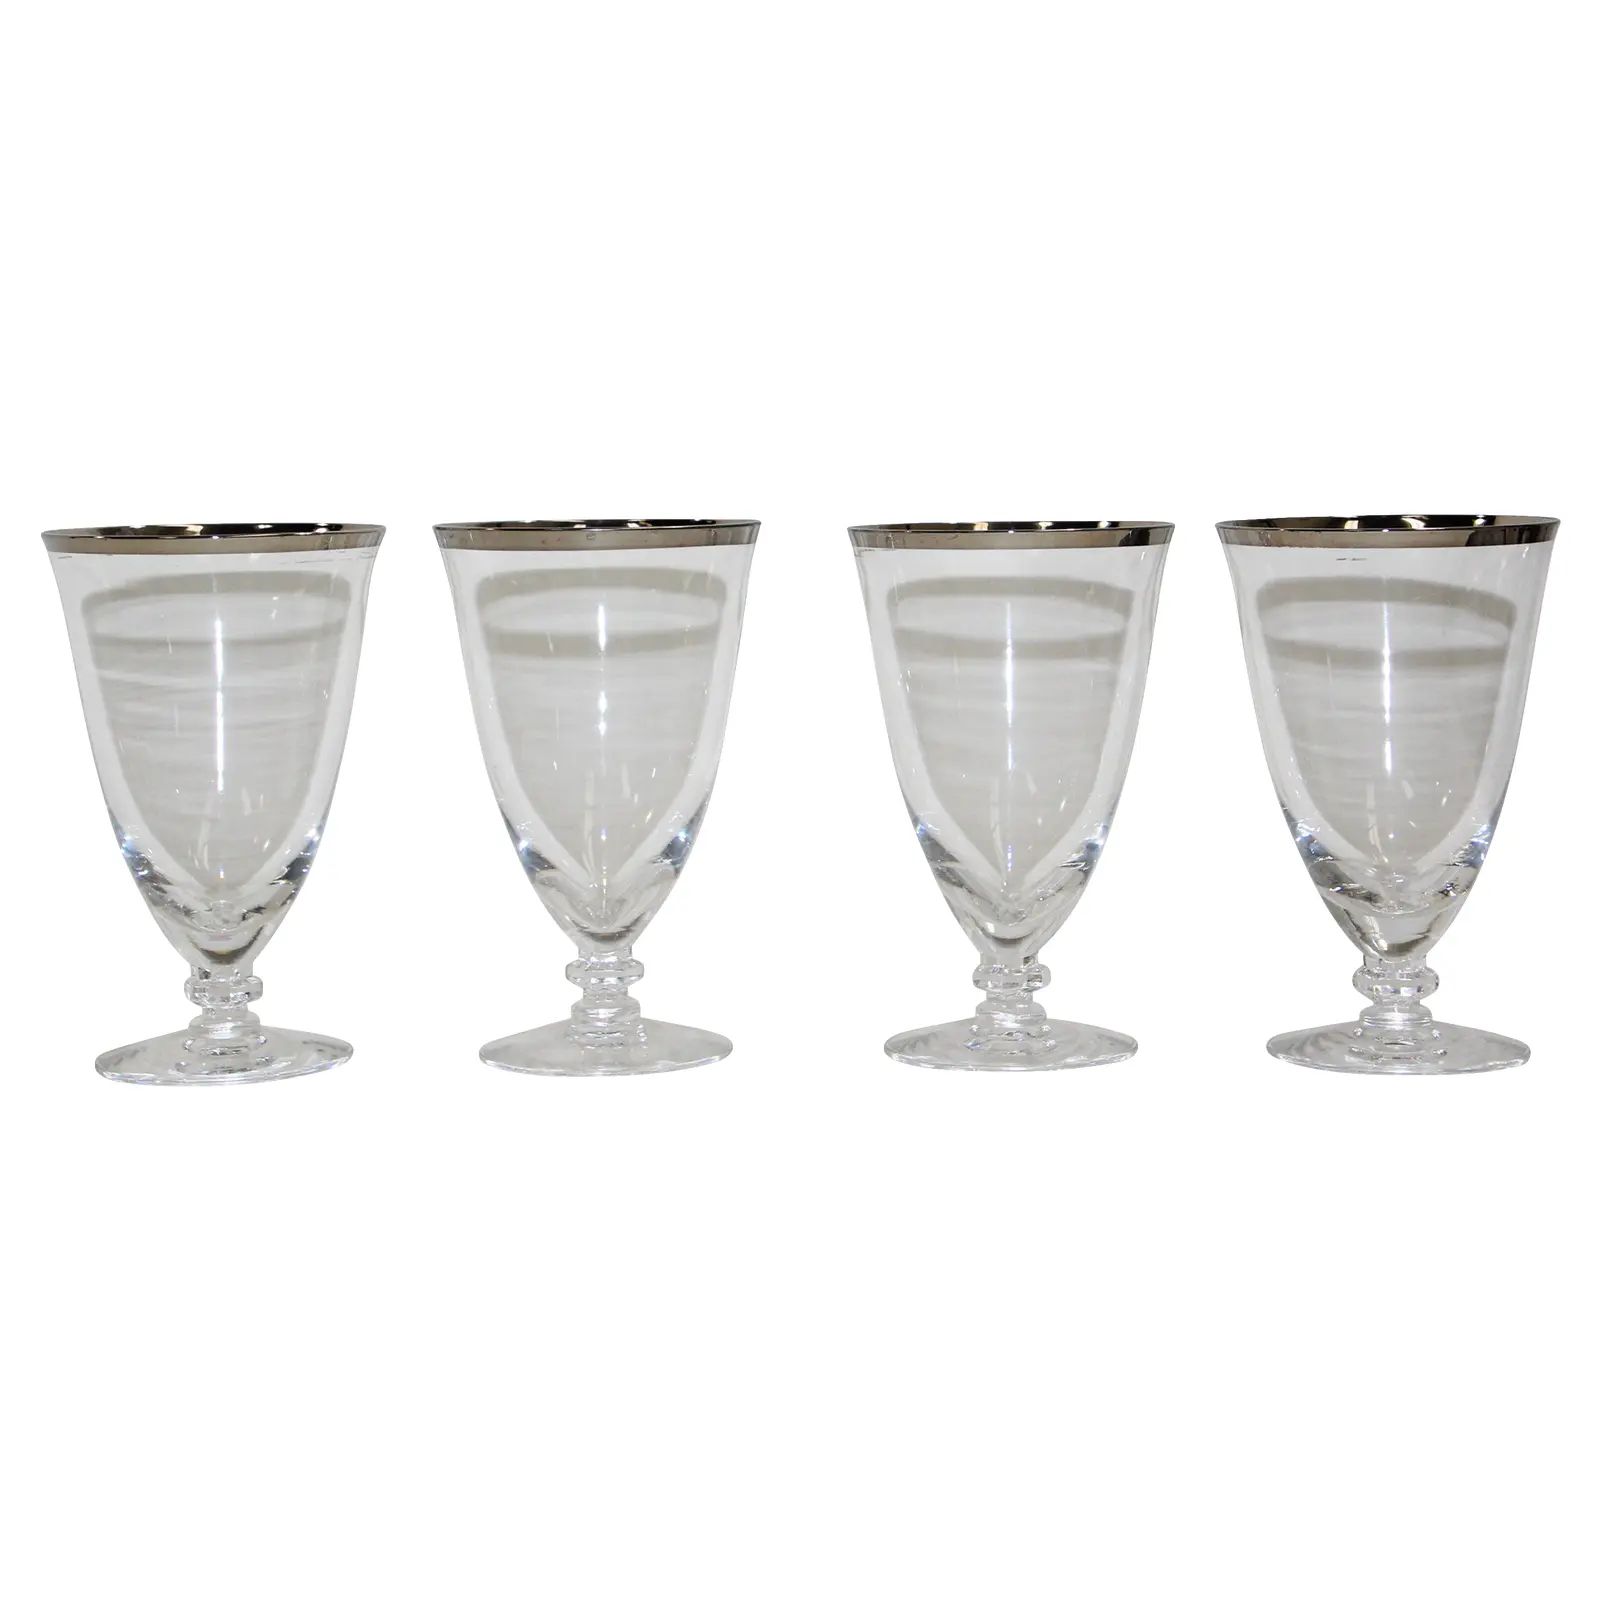 Vintage Crystal Footed Drinking Glasses Silver Rimmed Goblets - Set of 4 | Chairish